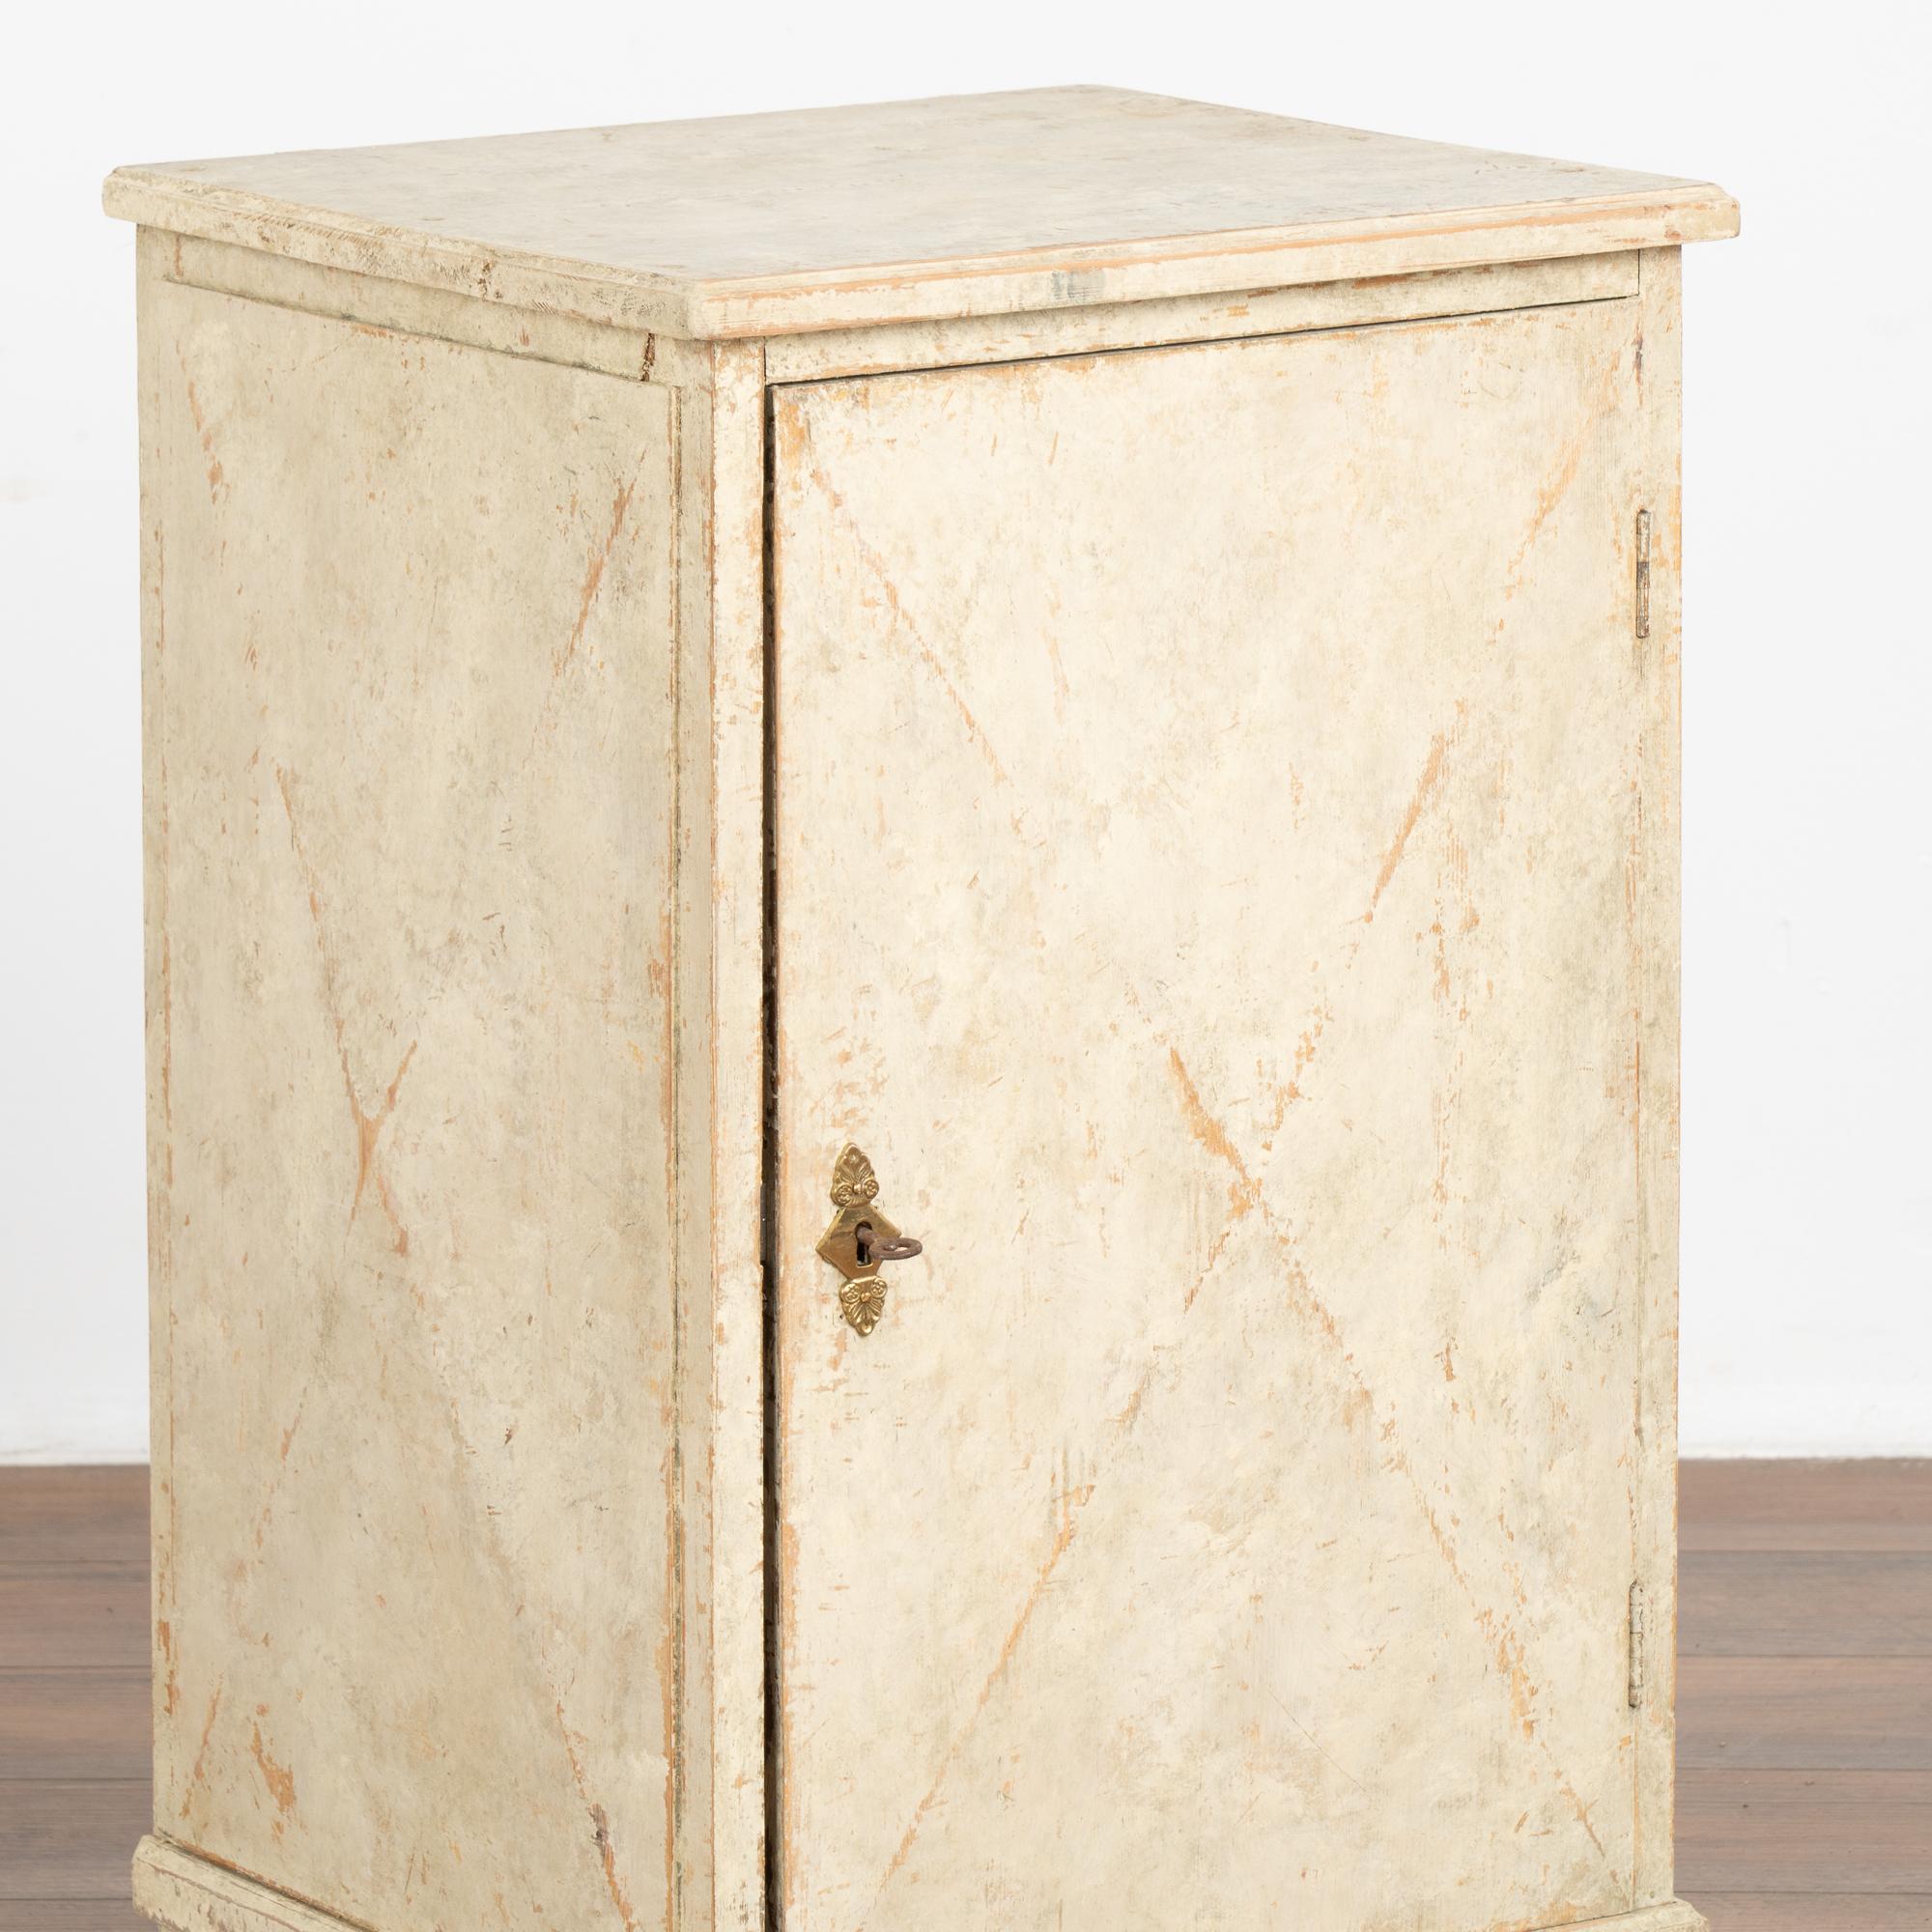 19th Century White Painted Small Cabinet or Sheet Music Cabinet, Sweden circa 1860-80 For Sale